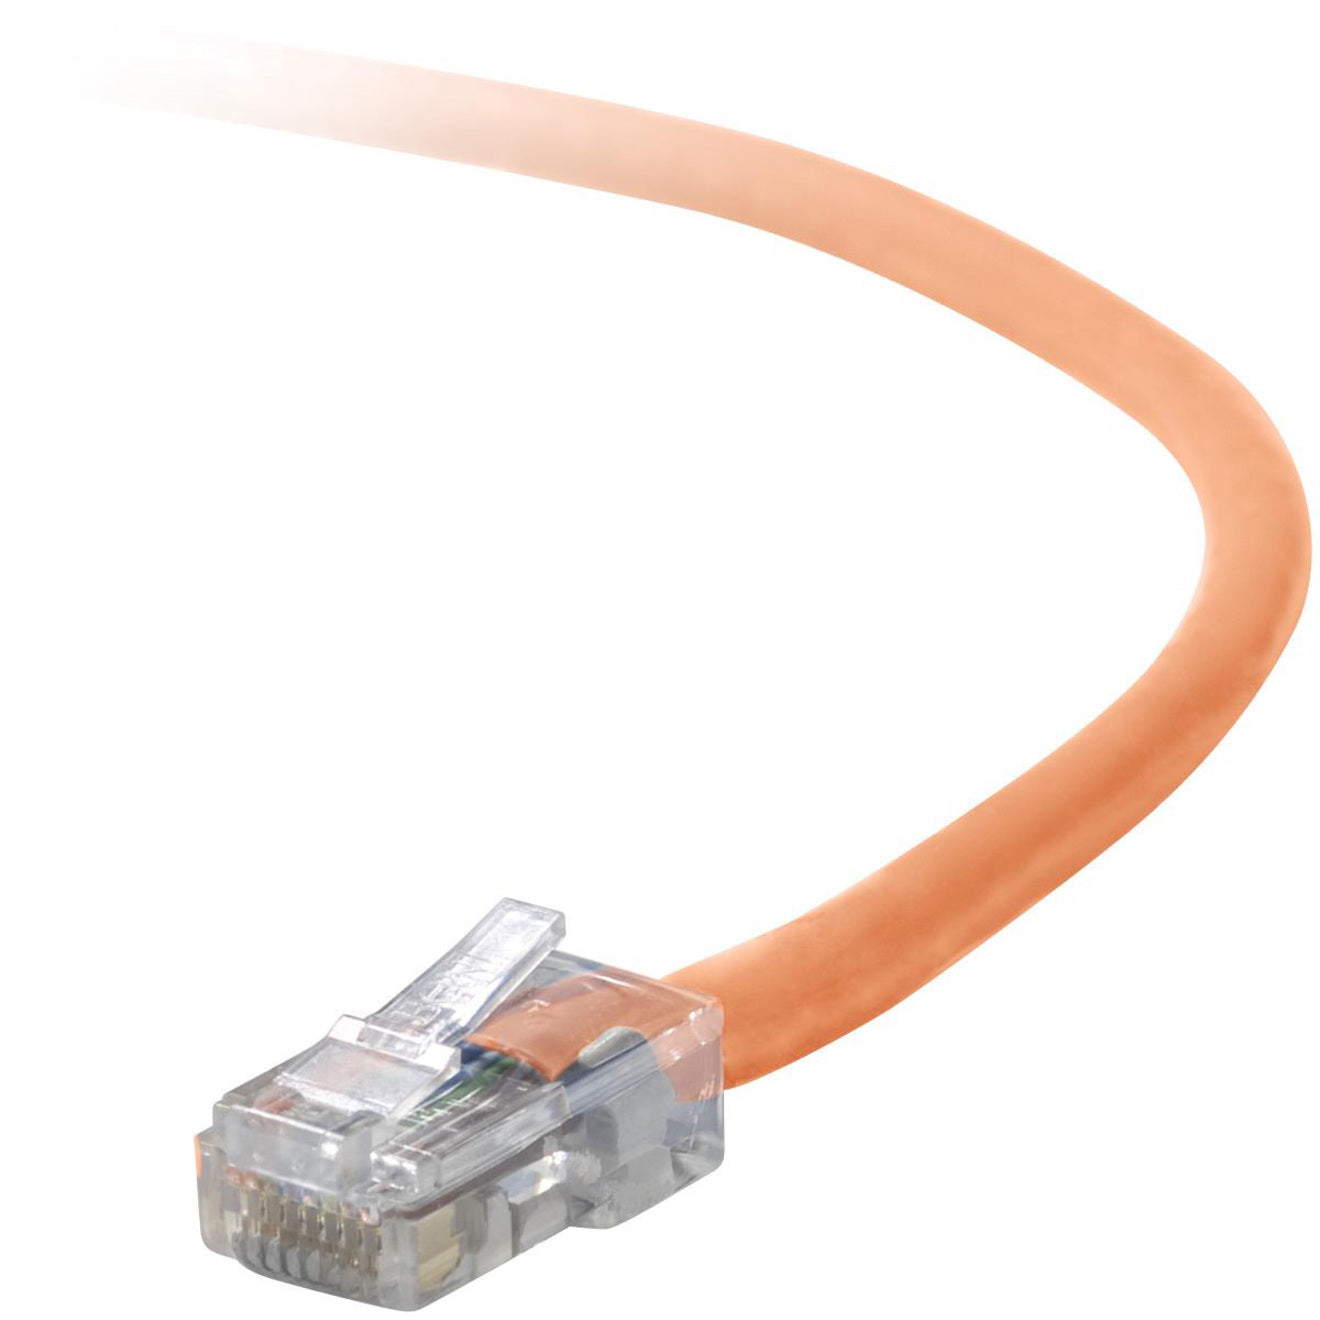 Belkin A3L791-20-ORG-S RJ45 Category 5e Snagless Patch Cable, 20 ft, Orange